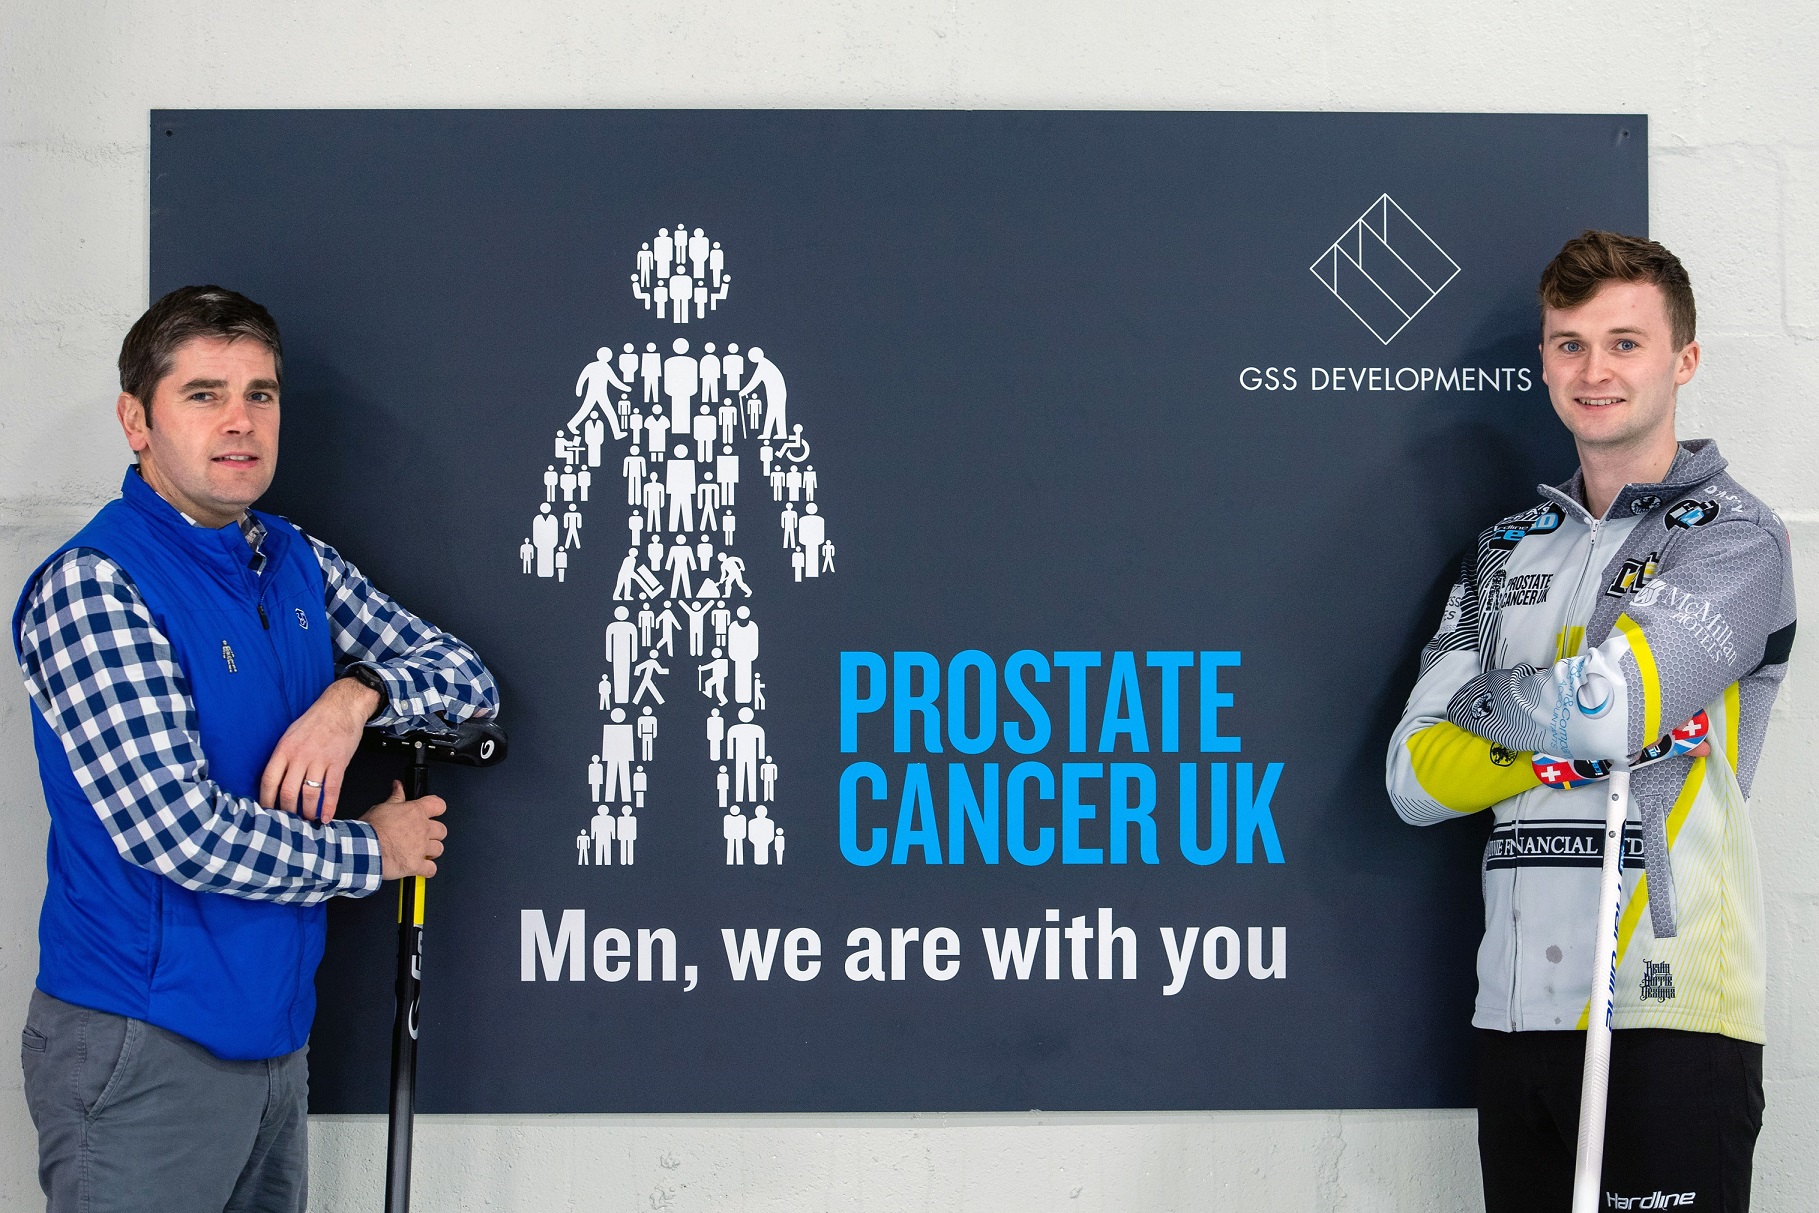 GSS Developments urges curlers ‘Don’t put prostate cancer conversation on ice’